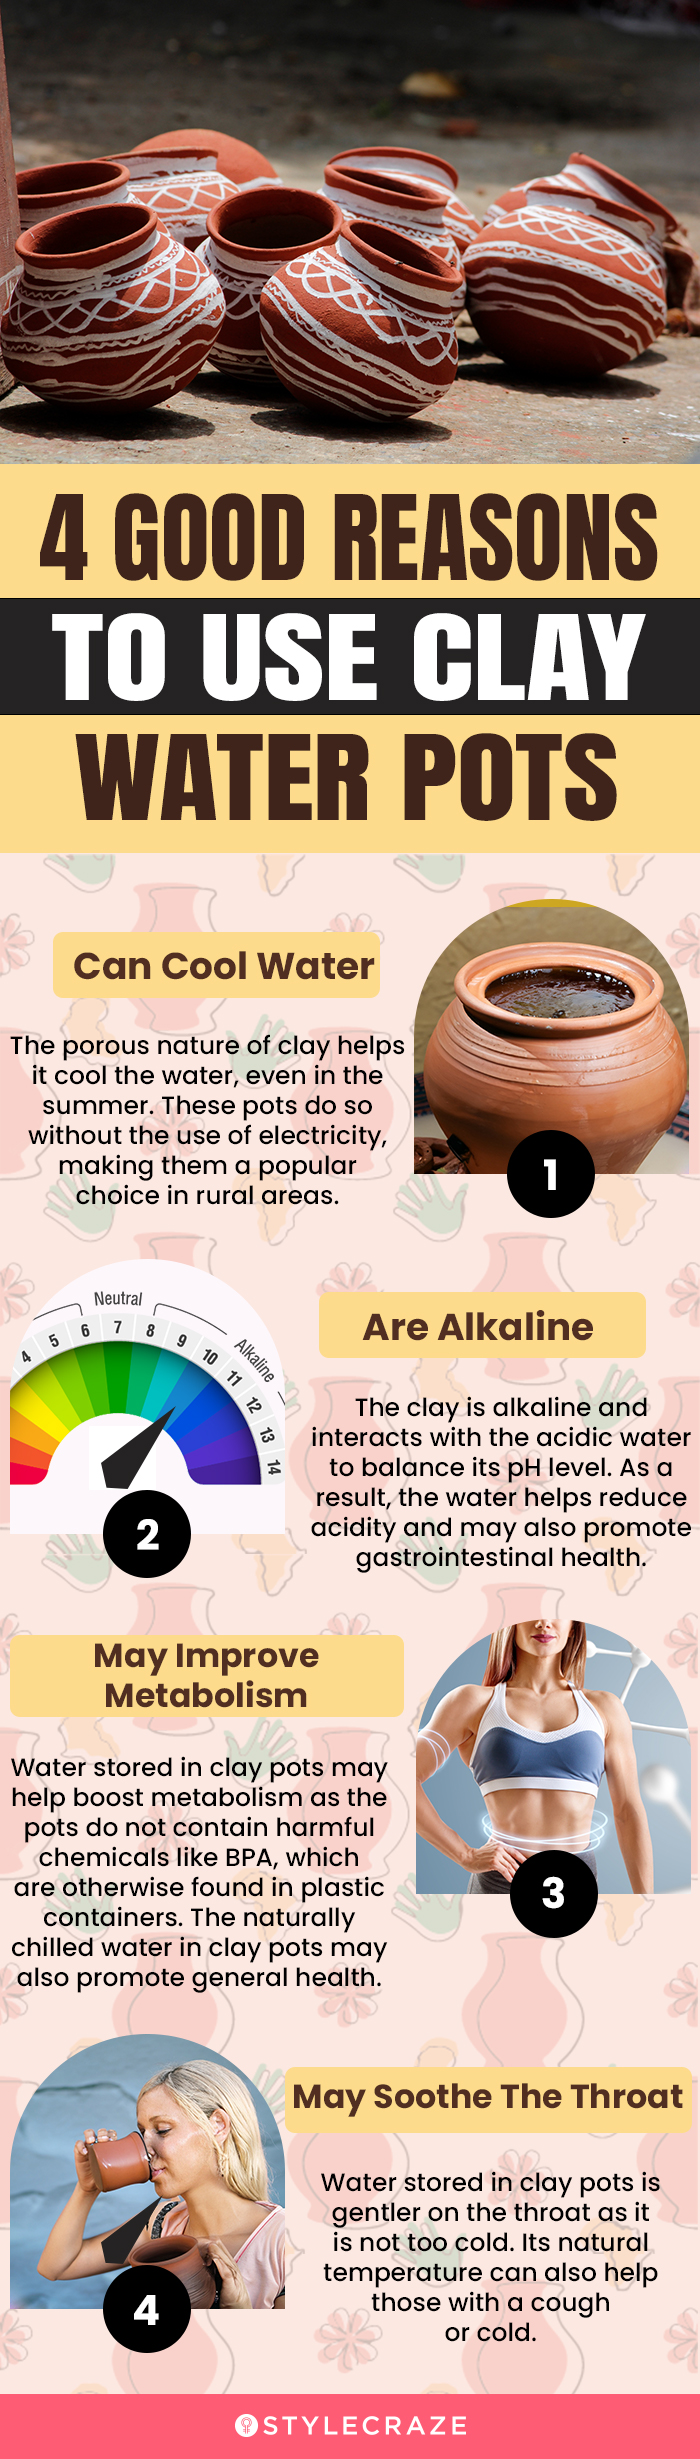 4 good reasons to use clay water pots (infographic)